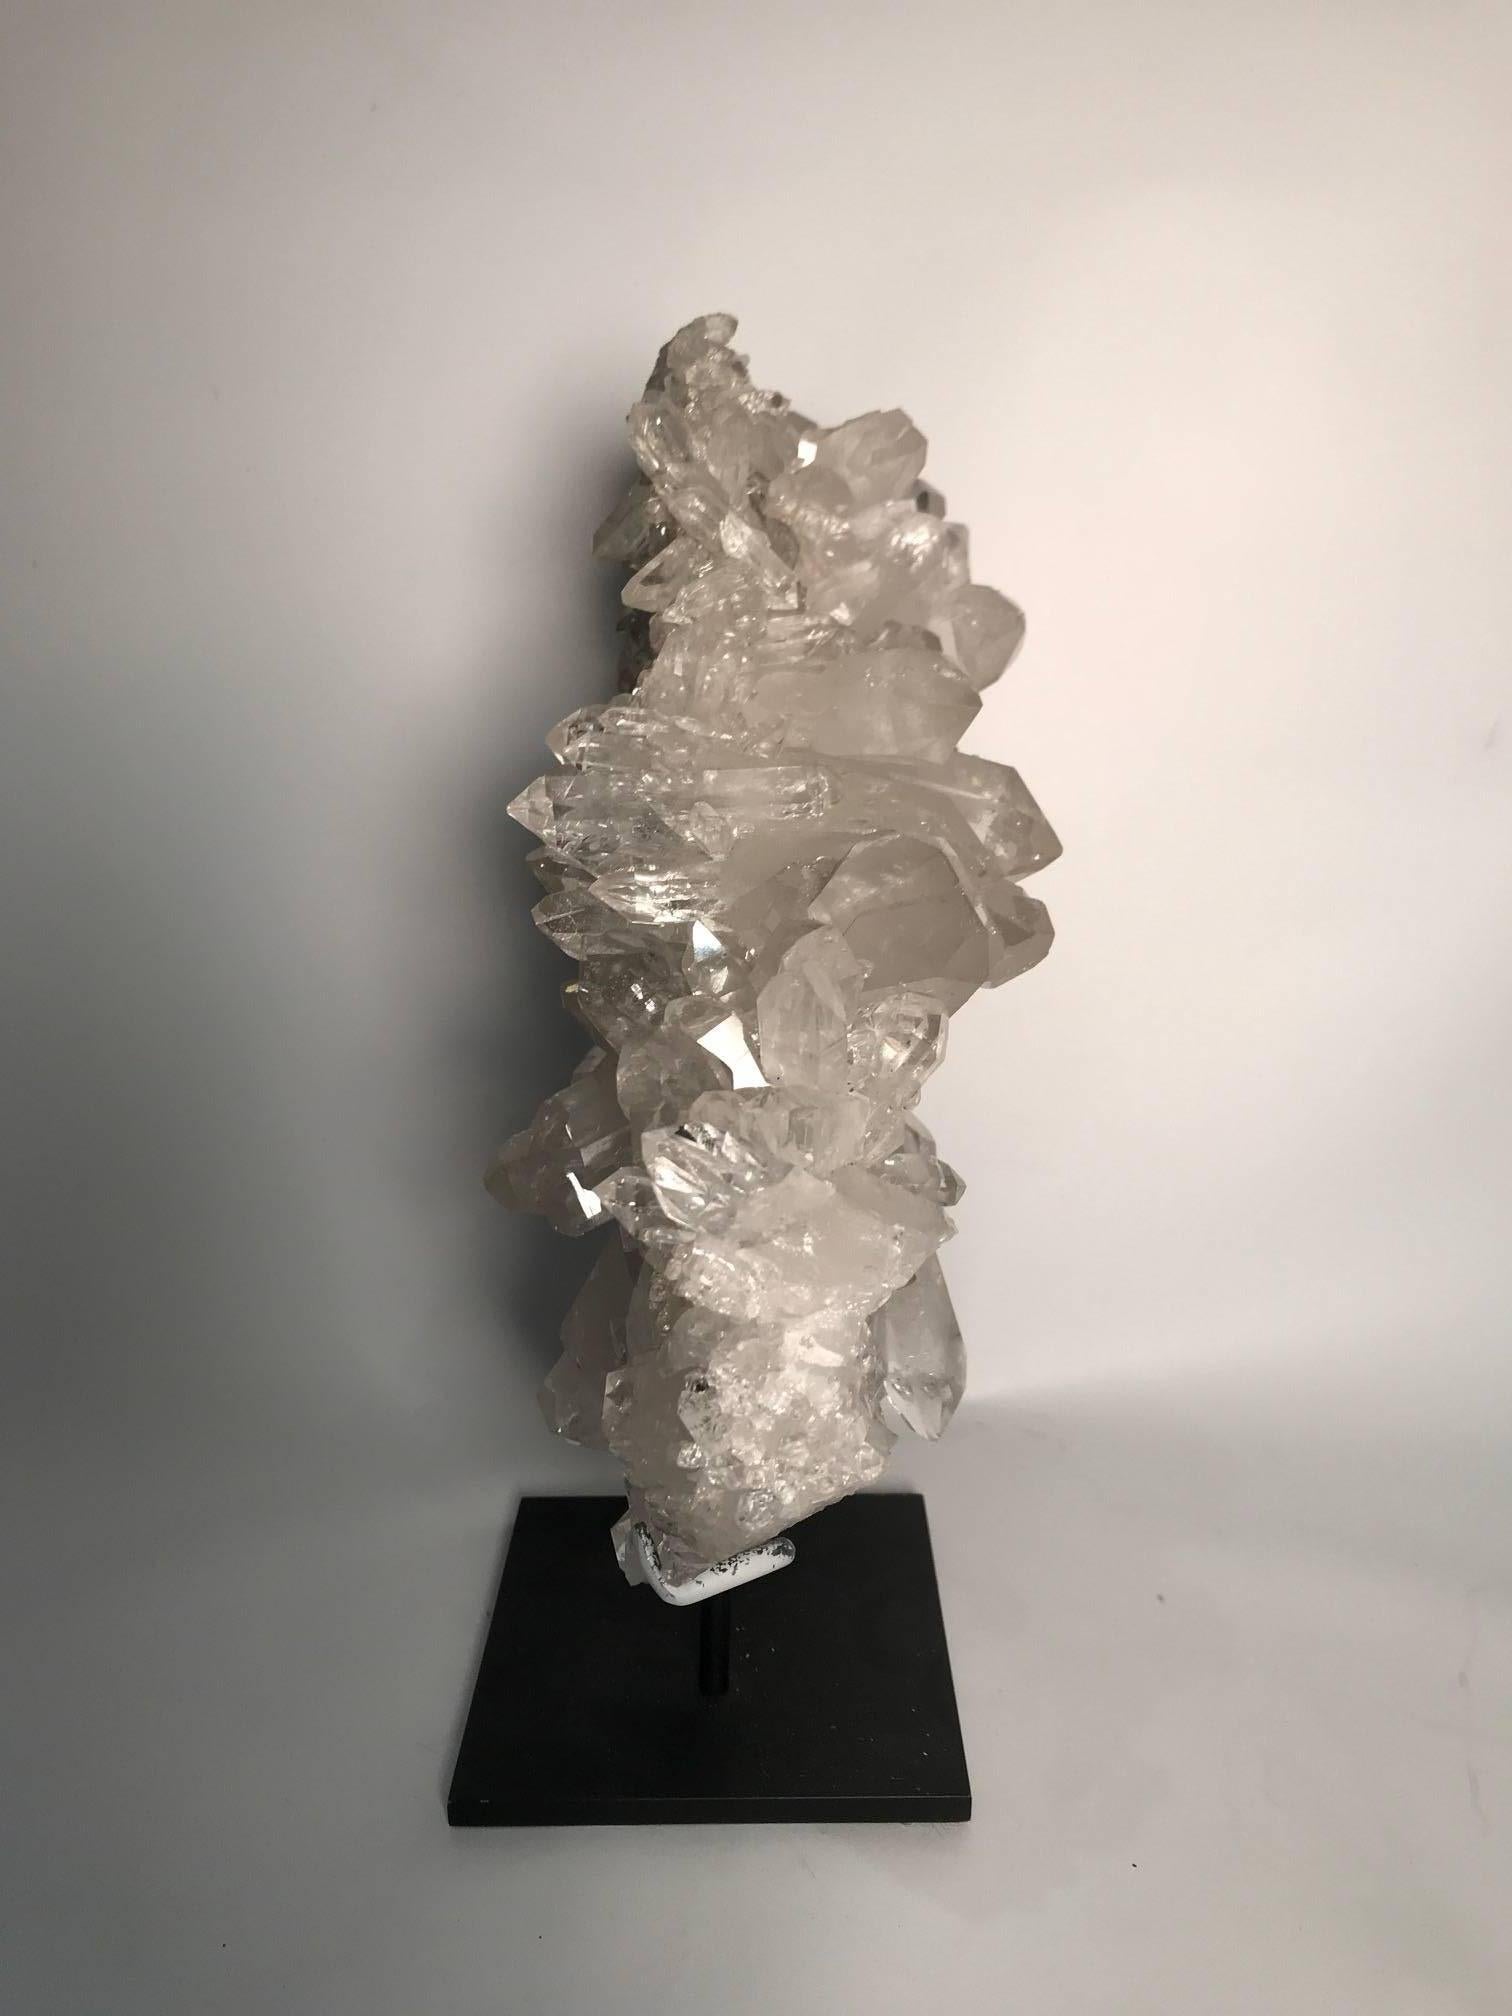 Double sided quartz rock crystal cluster mined in Arkansas, US, and custom mounted on a black metal base. Rock crystal, a form of quartz, has been used in jewelry and ornaments since antiquity, and is the purest form of quartz.